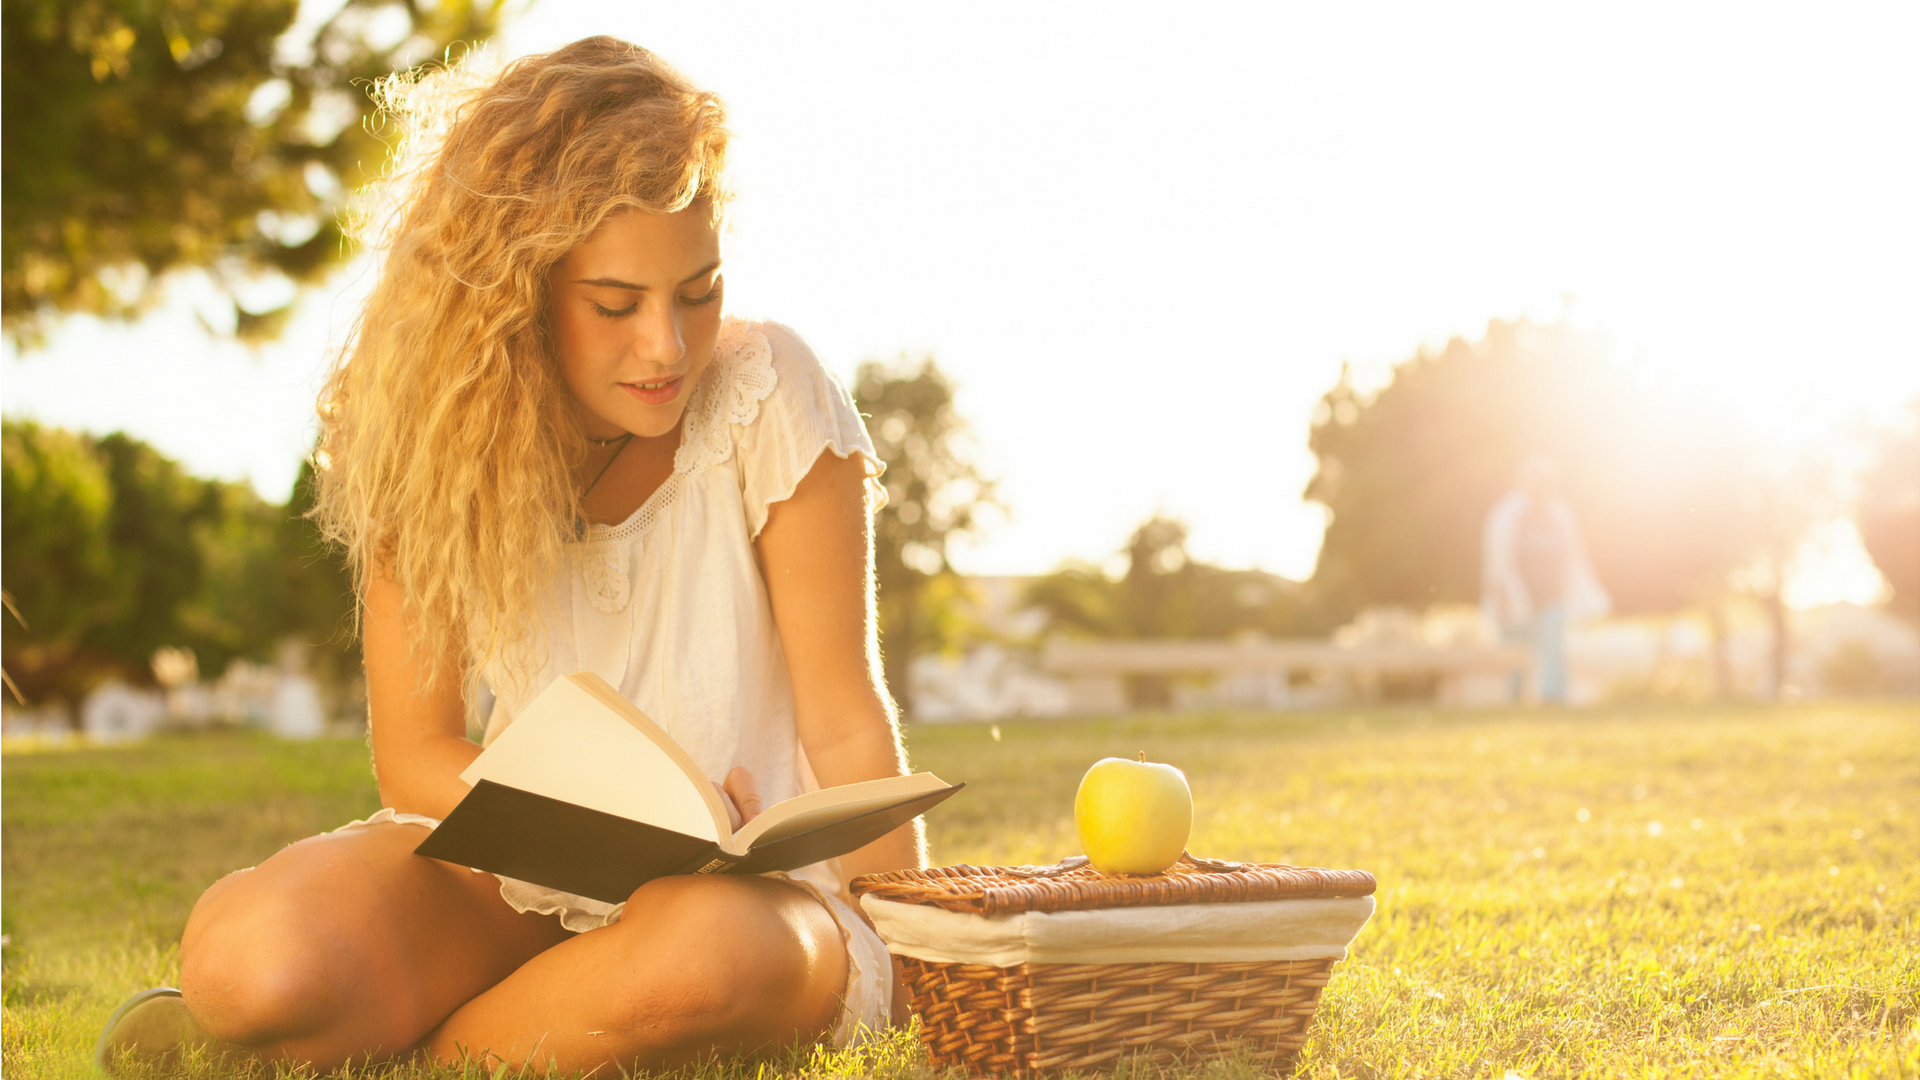 Feature Girl Reading Motivational Book